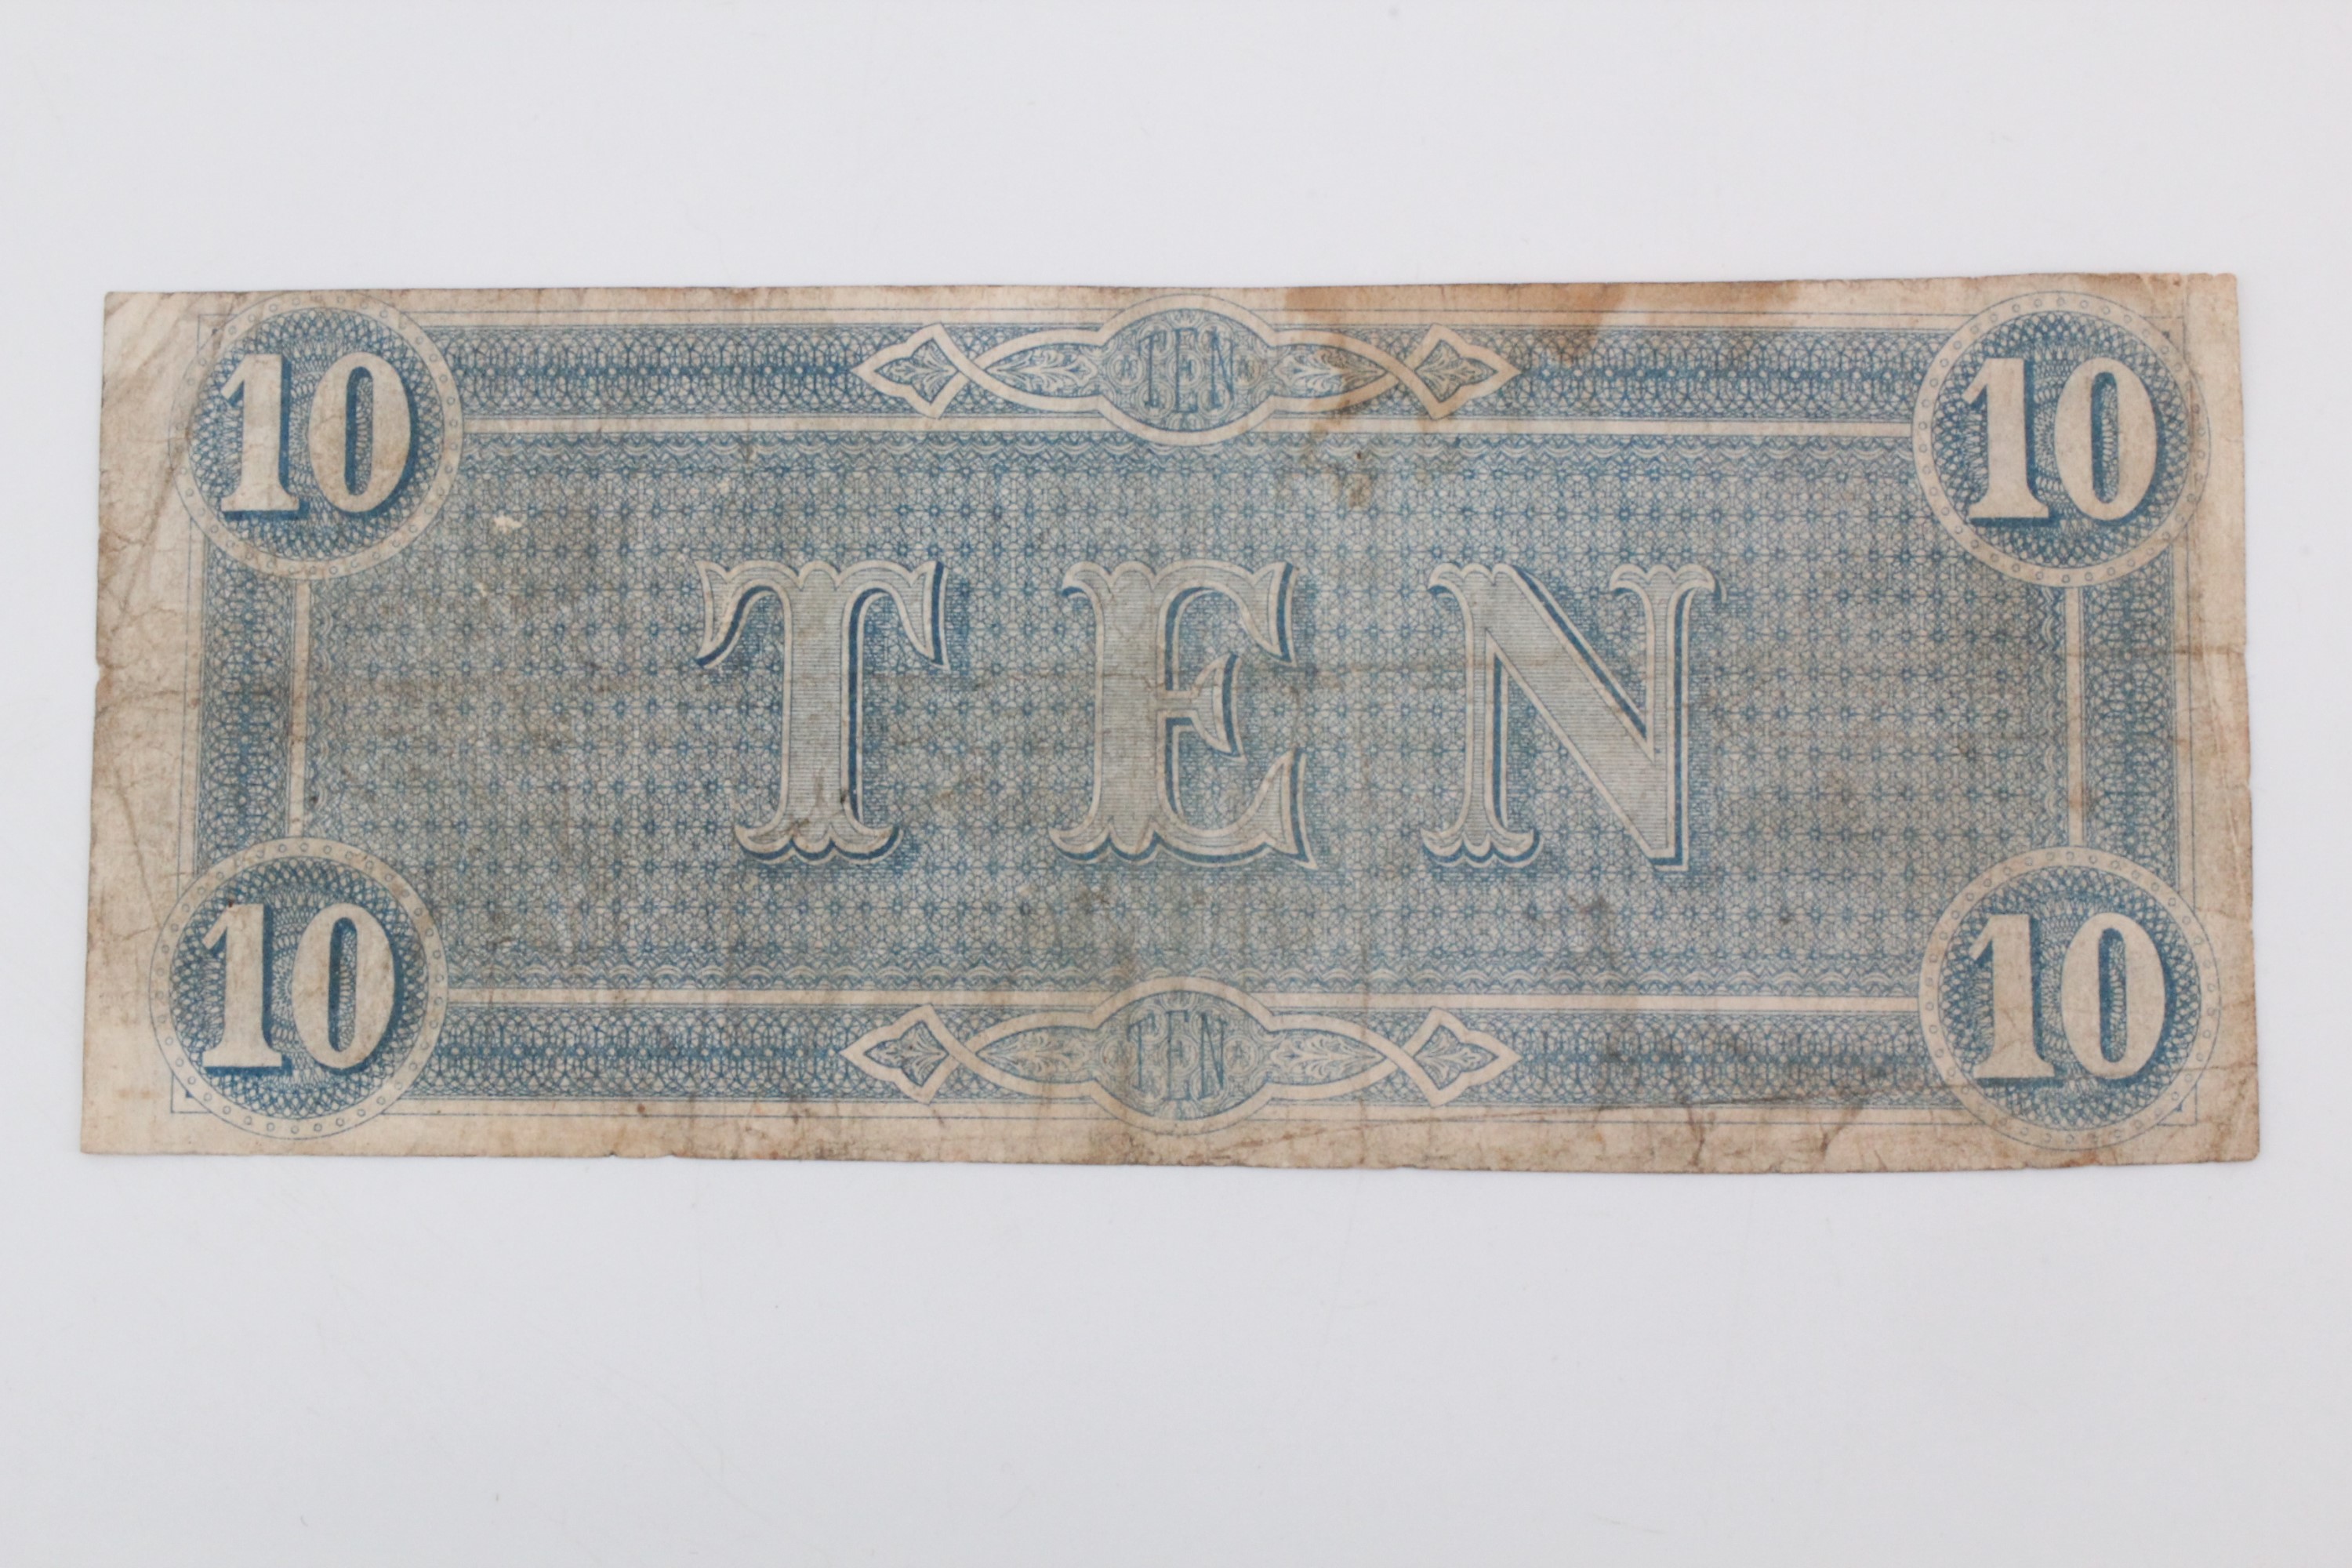 A Confederate States of America 1864 Richmond 10 dollar banknote - Image 2 of 2